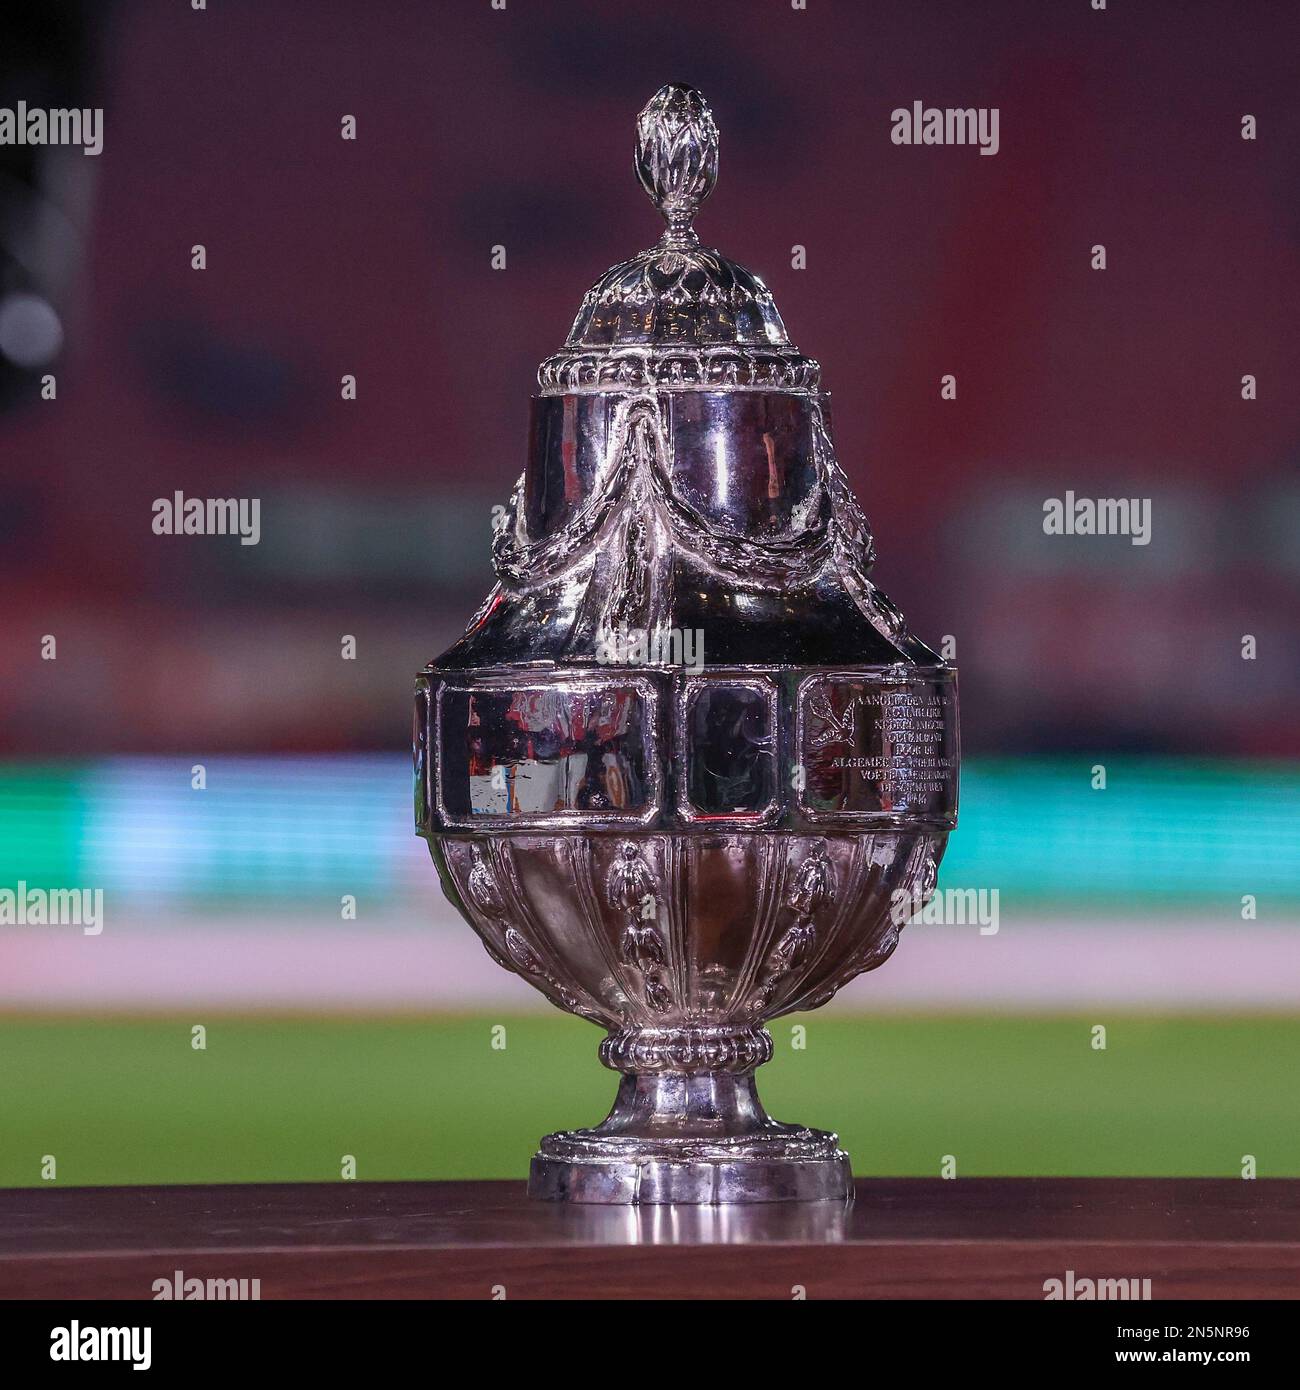 Toto knvb beker hi-res stock photography and images - Alamy